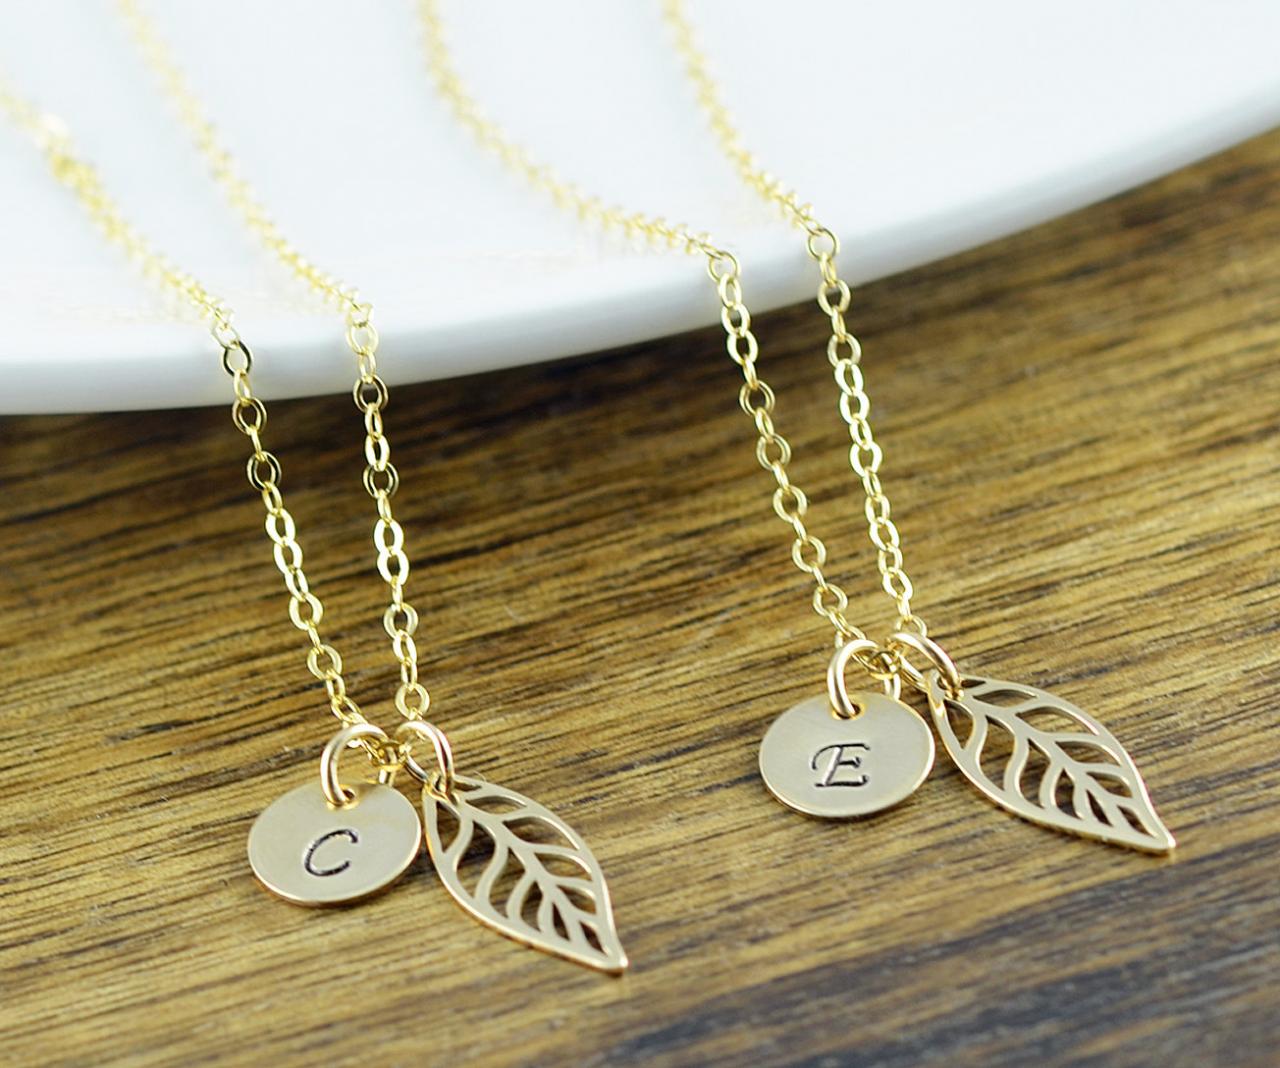 Gold Necklace - Bridal Party Jewelry - Gold Leaf Necklace - Leaf Necklace Gold - Bridesmaid Gift - Bridesmaid Jewelry